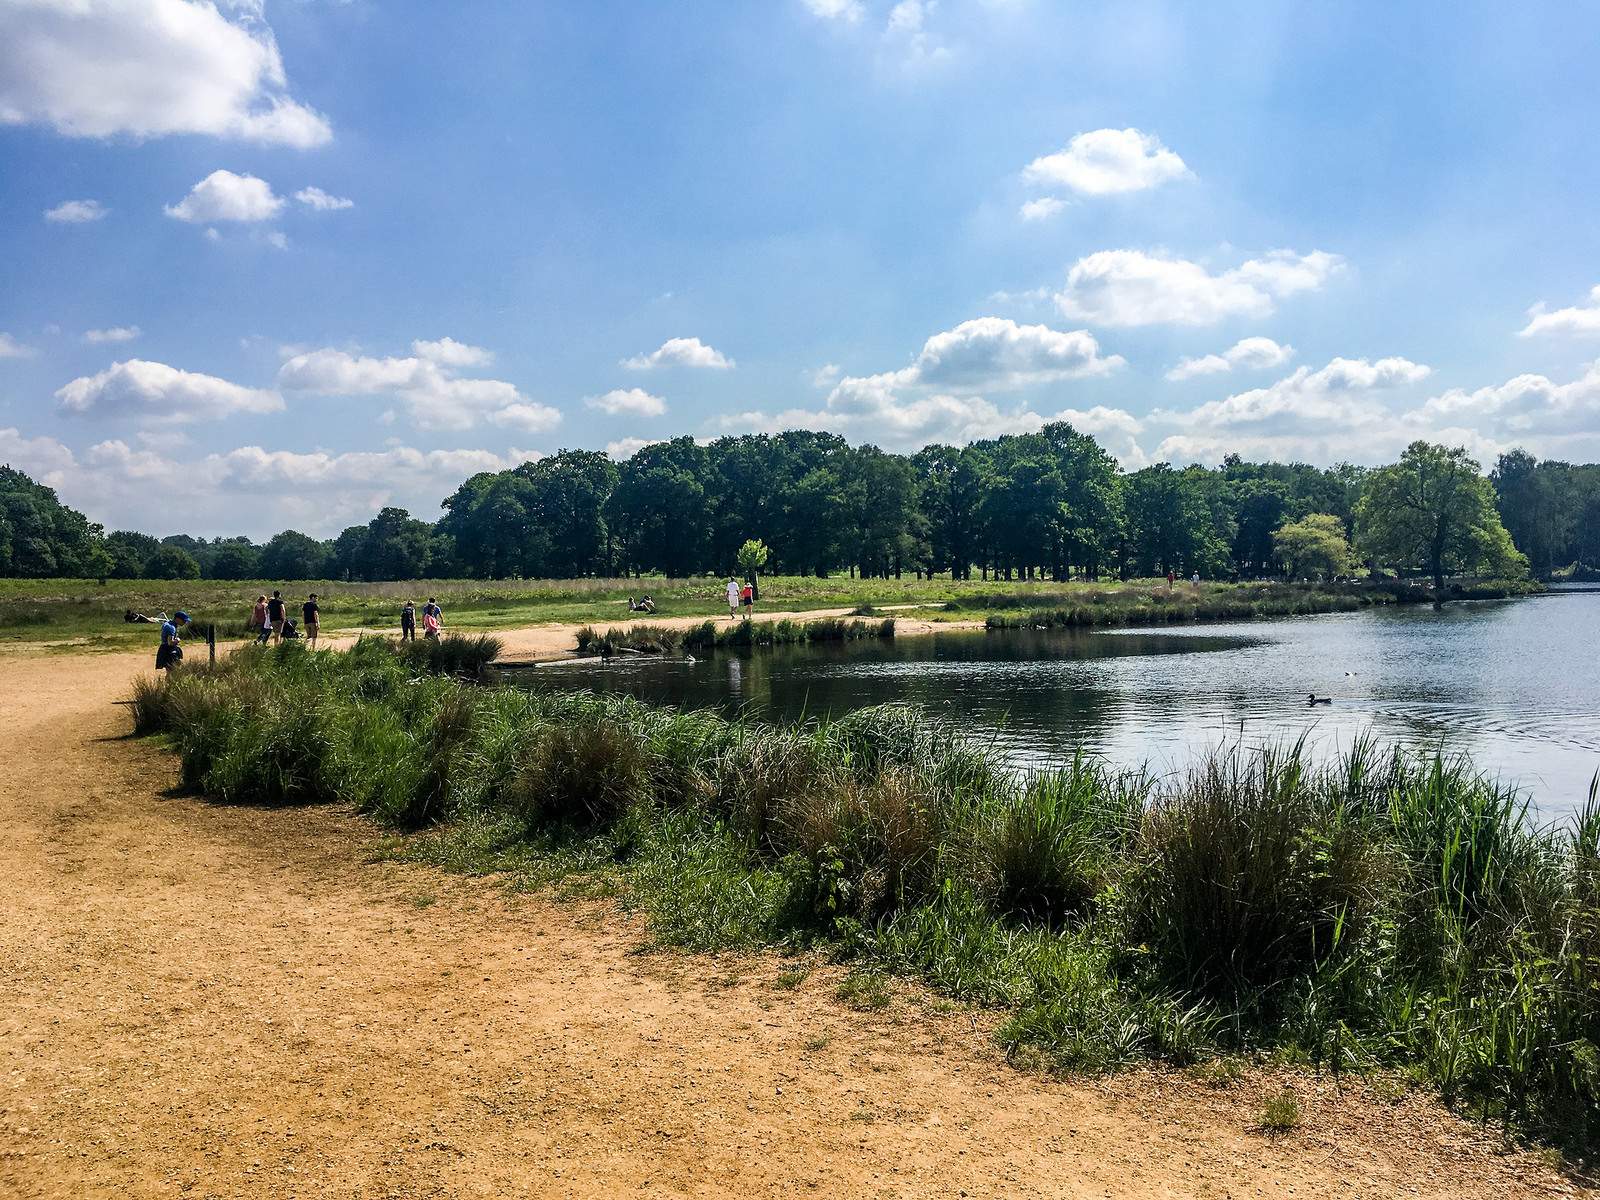 One of many beautifull views in Richmond Park, London.